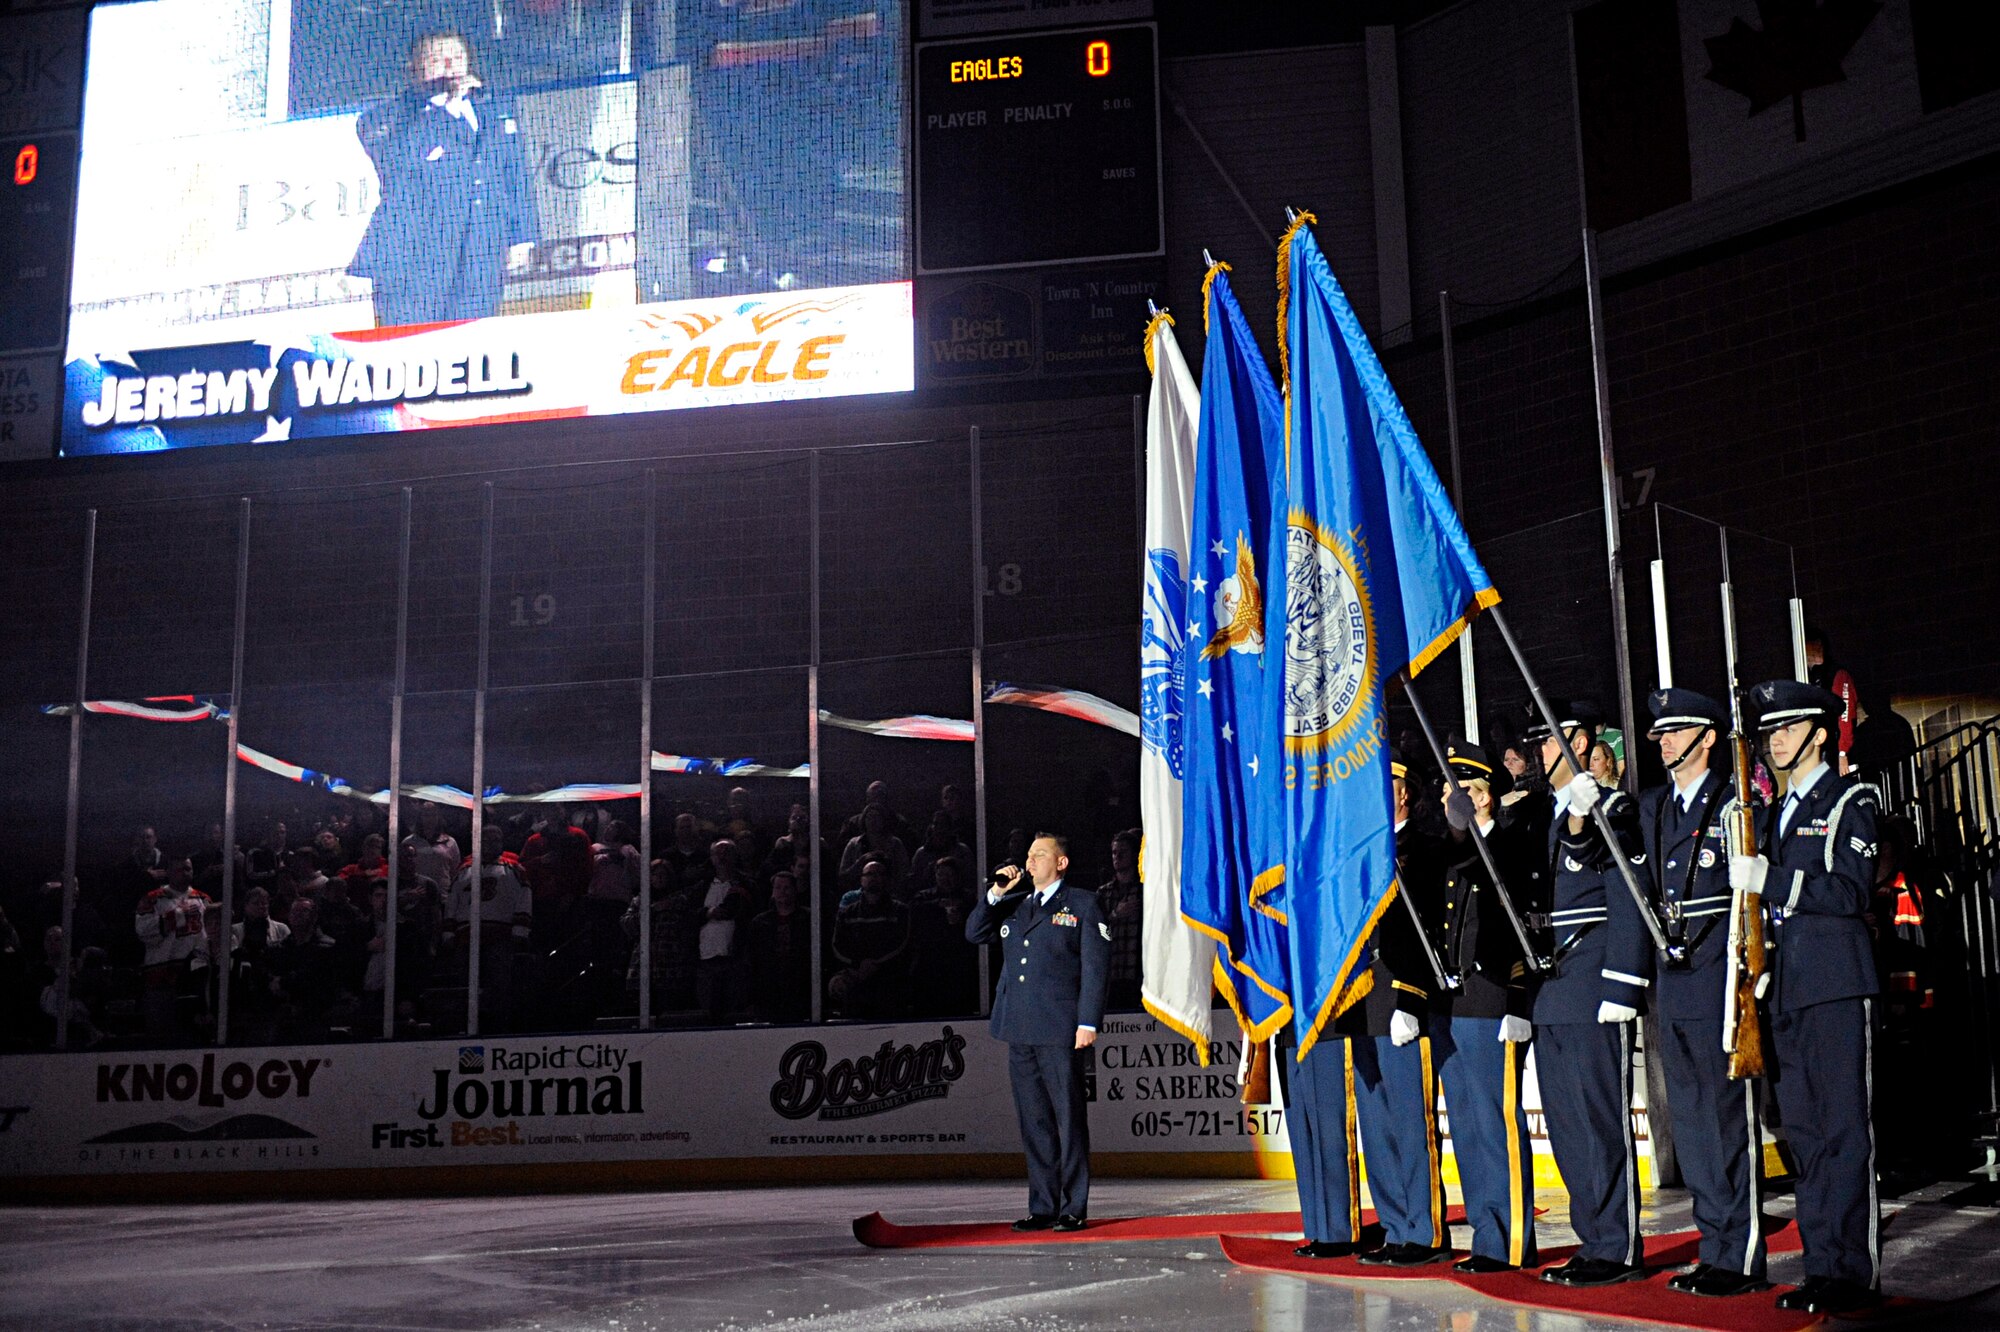 ELLSWORTH AIR FORCE BASE, S.D. -- (Left) Tech. Sgt. Jeremy Waddell, 372nd Training Squadron aerospace propulsion instructor, sings the National Anthem while the Ellsworth Honor Guard presents the colors at a Rapid City Rush game Nov. 20. The Rapid City Rush hosted a military appreciation night with more than 5,000 fans in attendance. (U.S. Air Force photo/Airman 1st Class Matthew Flynn)